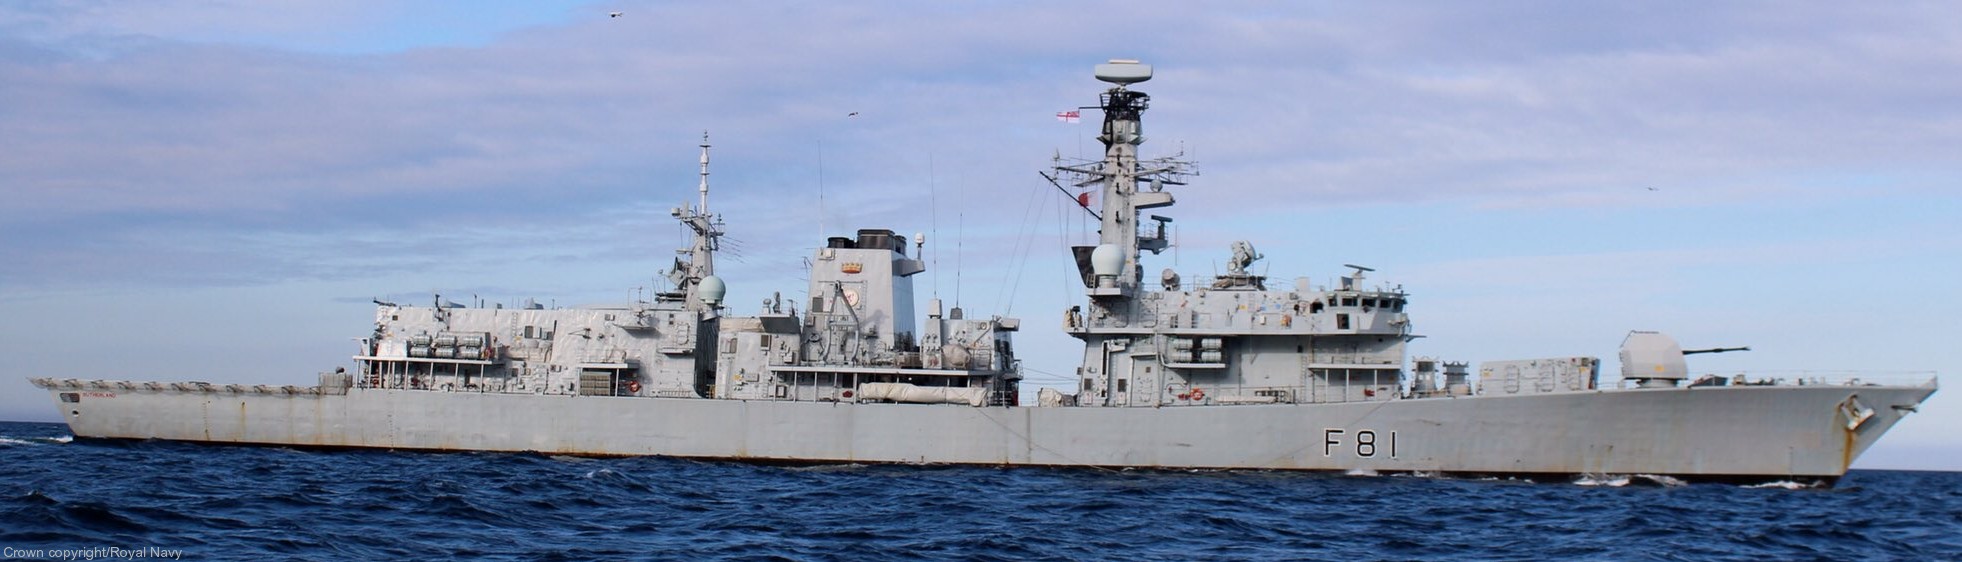 f-81 hms sutherland type 23 duke class guided missile frigate ffg royal navy 20